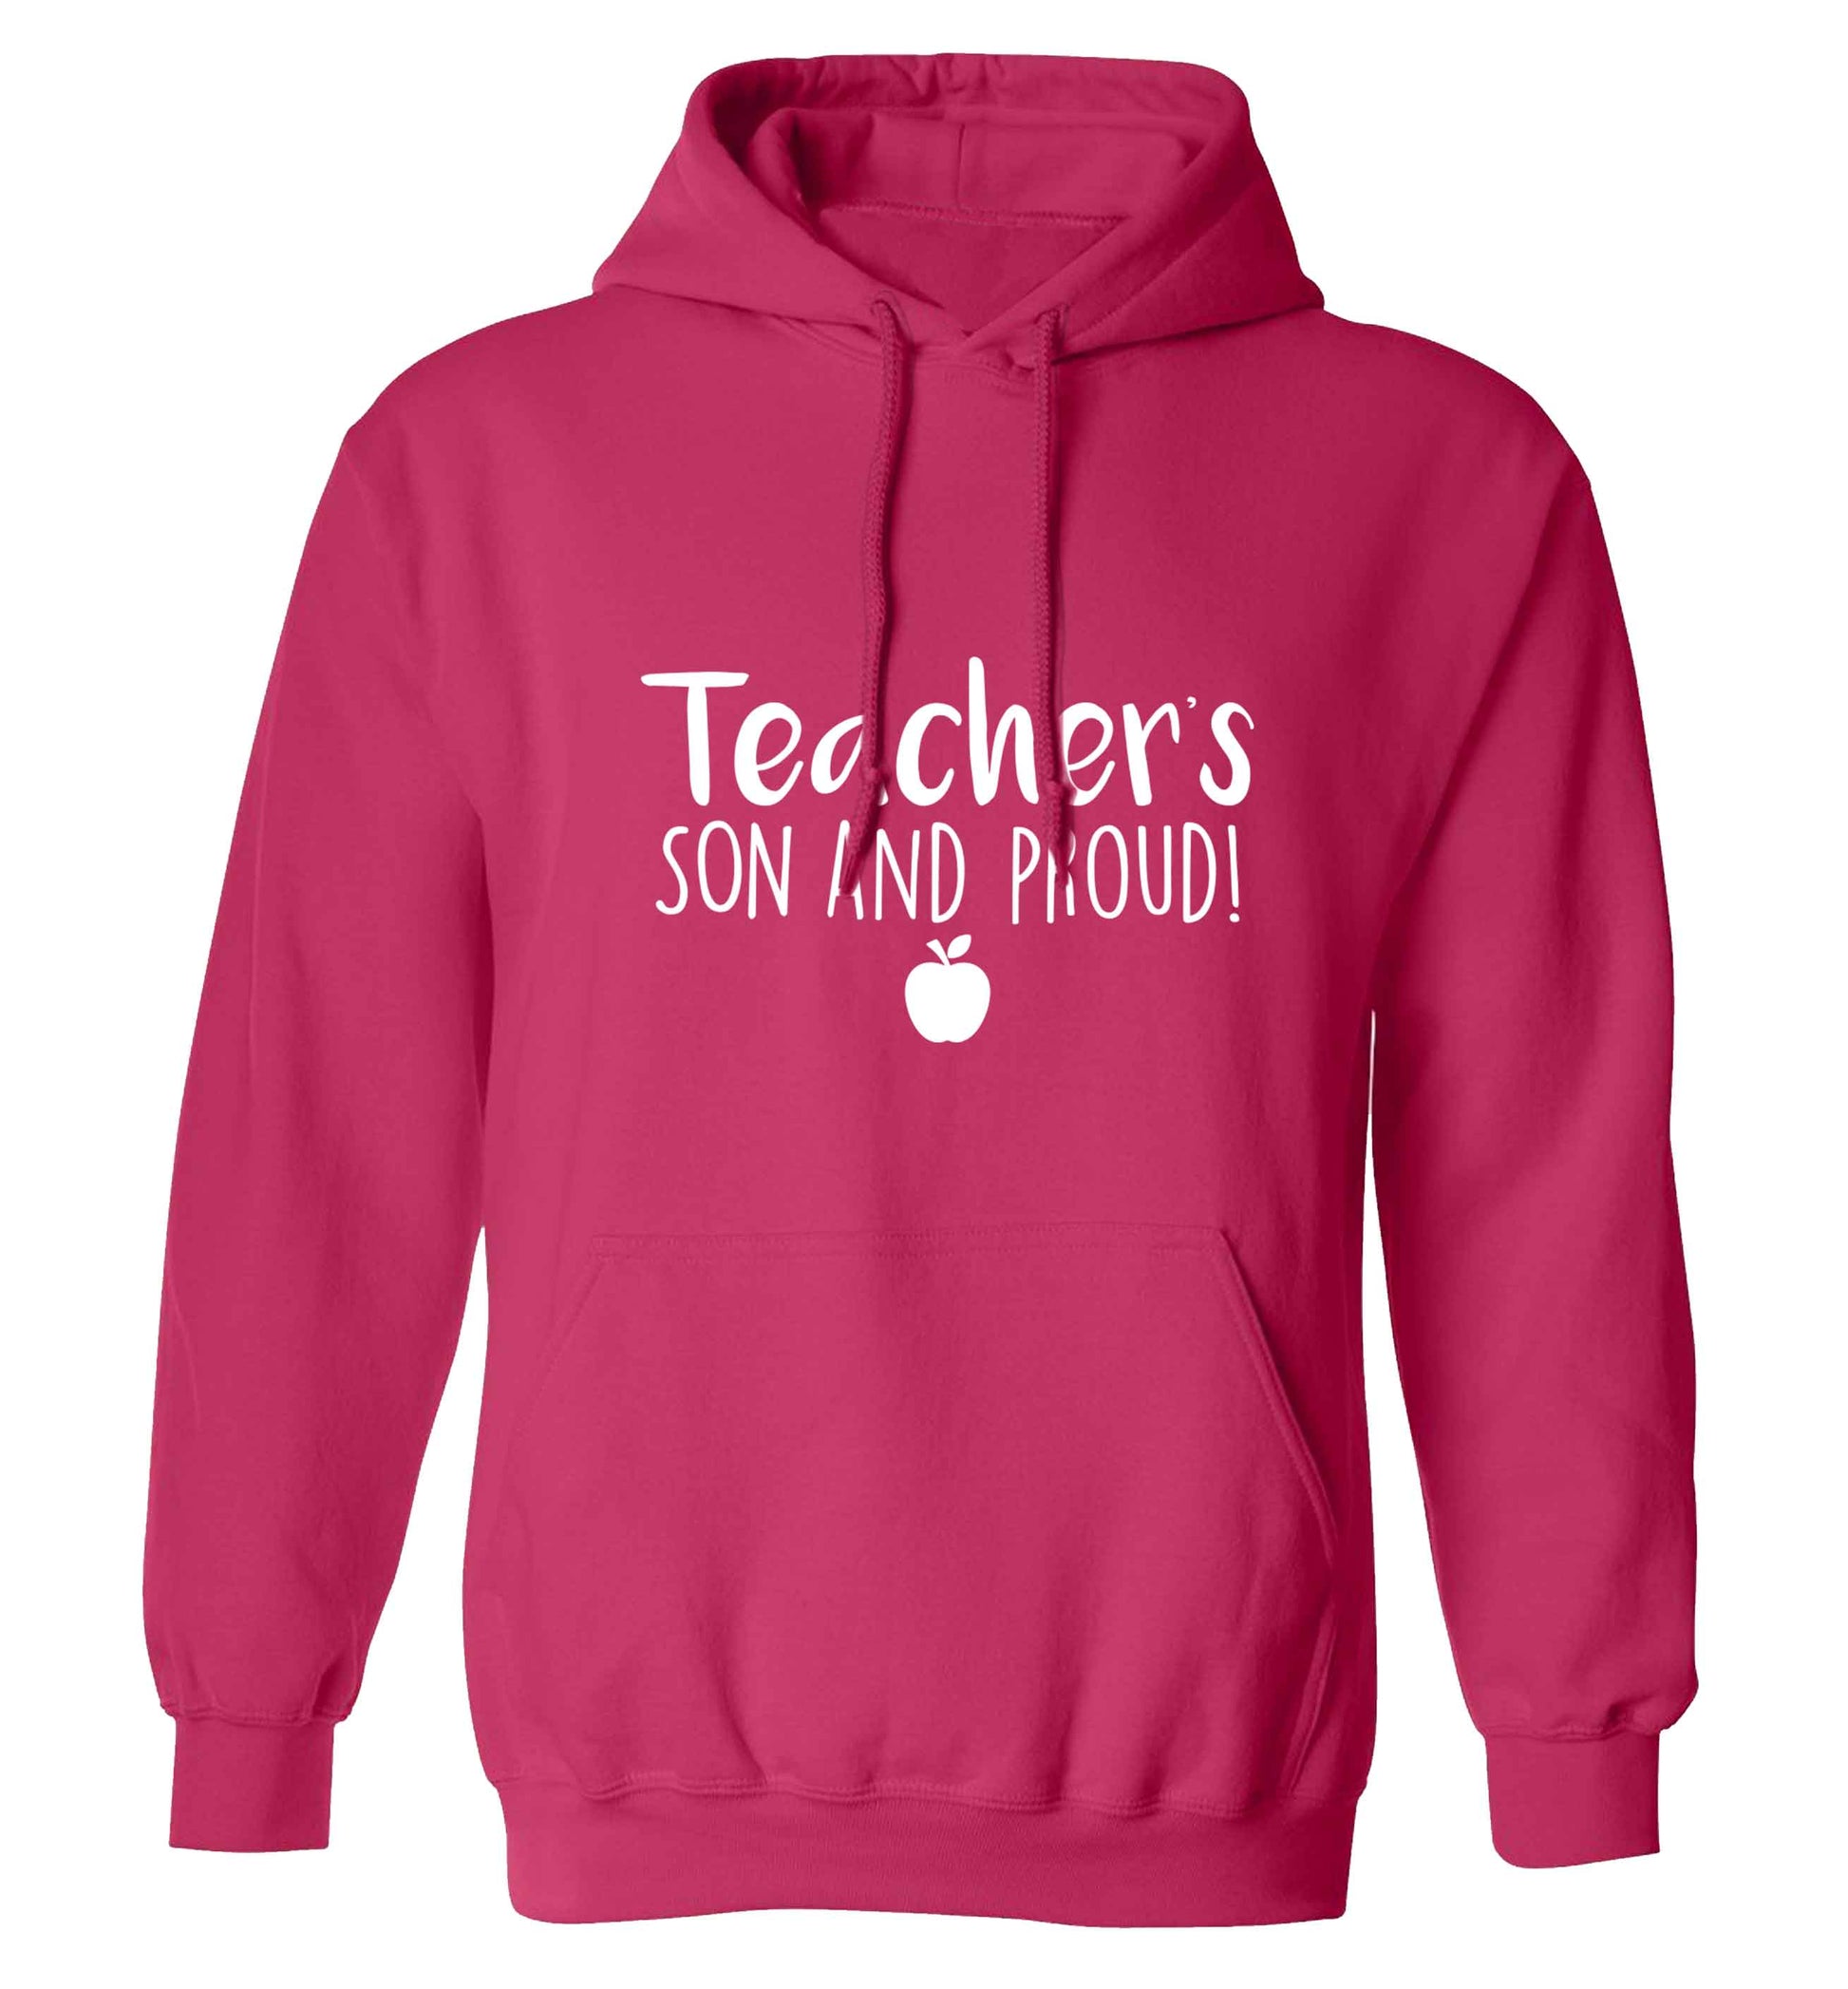 Teachers son and proud adults unisex pink hoodie 2XL